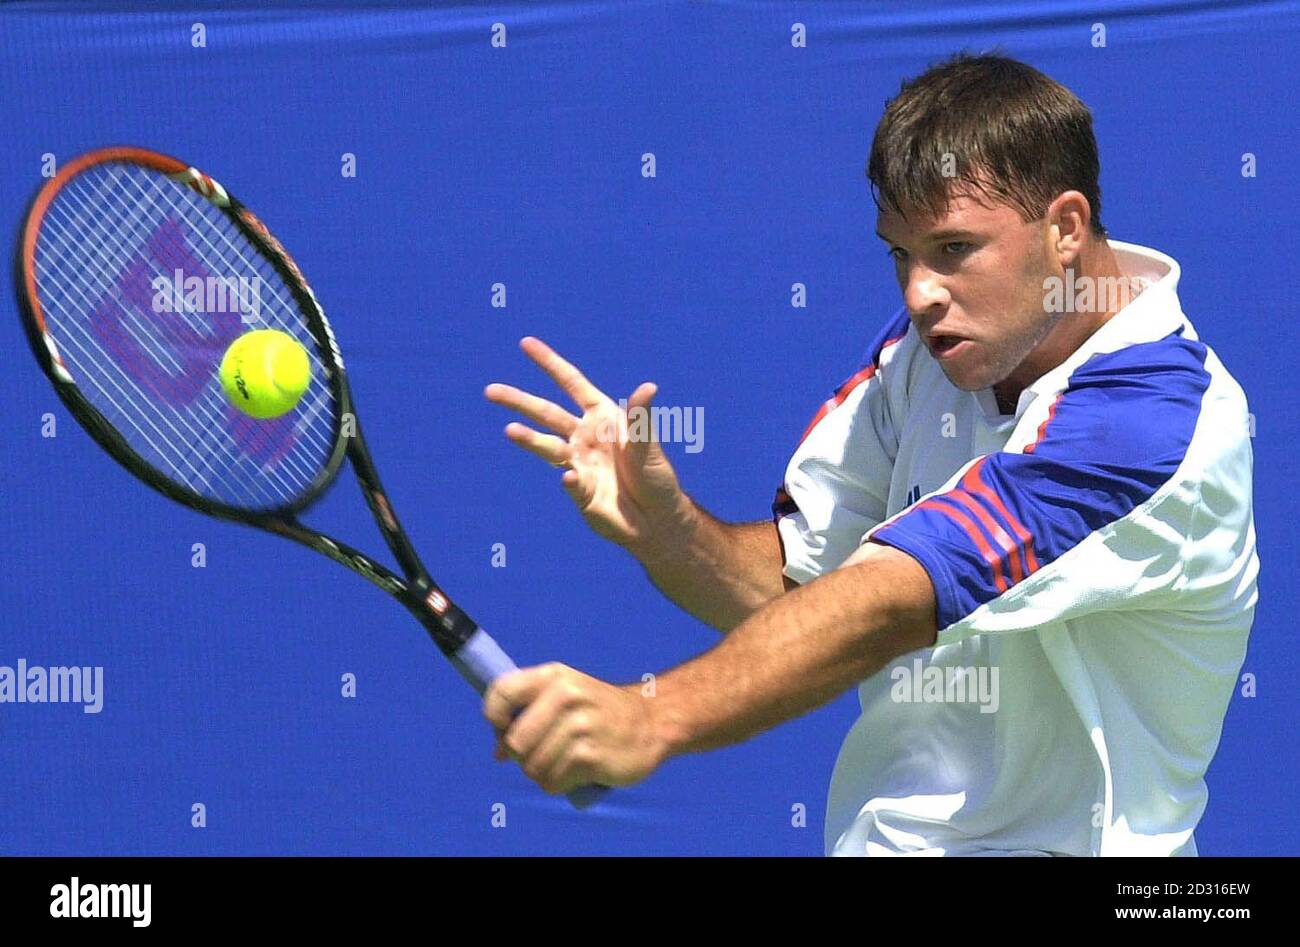 British tennis player Barry Cowan in action against Canada's Daniel Nestor  during the first round of the Men's Singles at the Olympic Games in Sydney.  * 27/06/01: Cowan was set to face